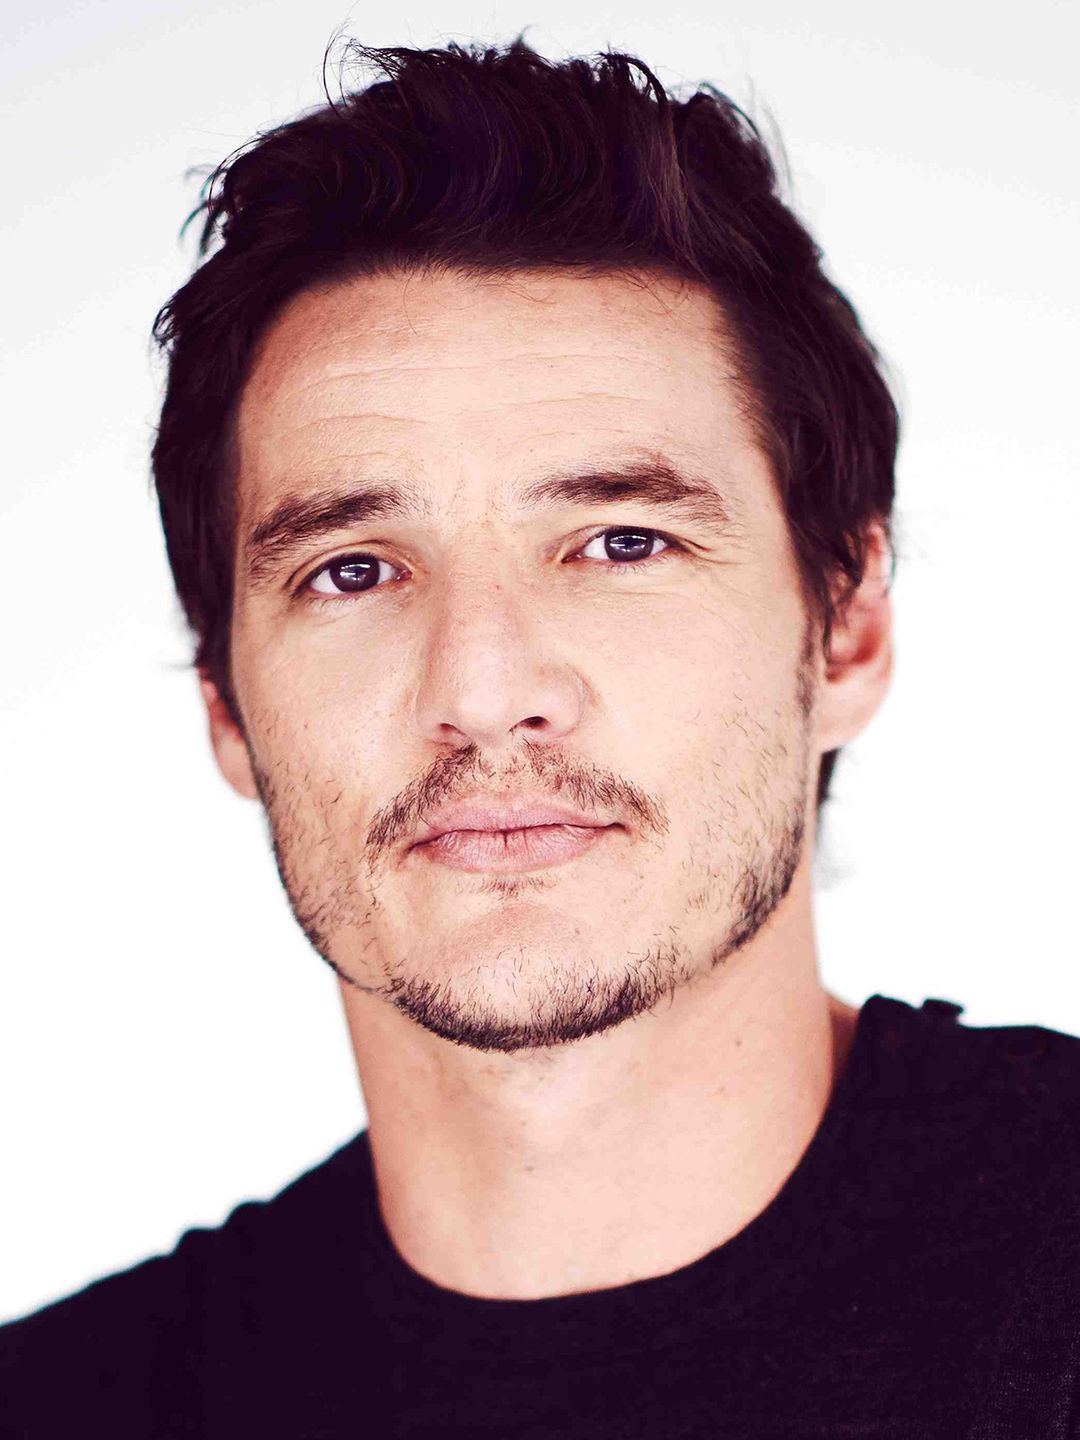 Pedro Pascal early career